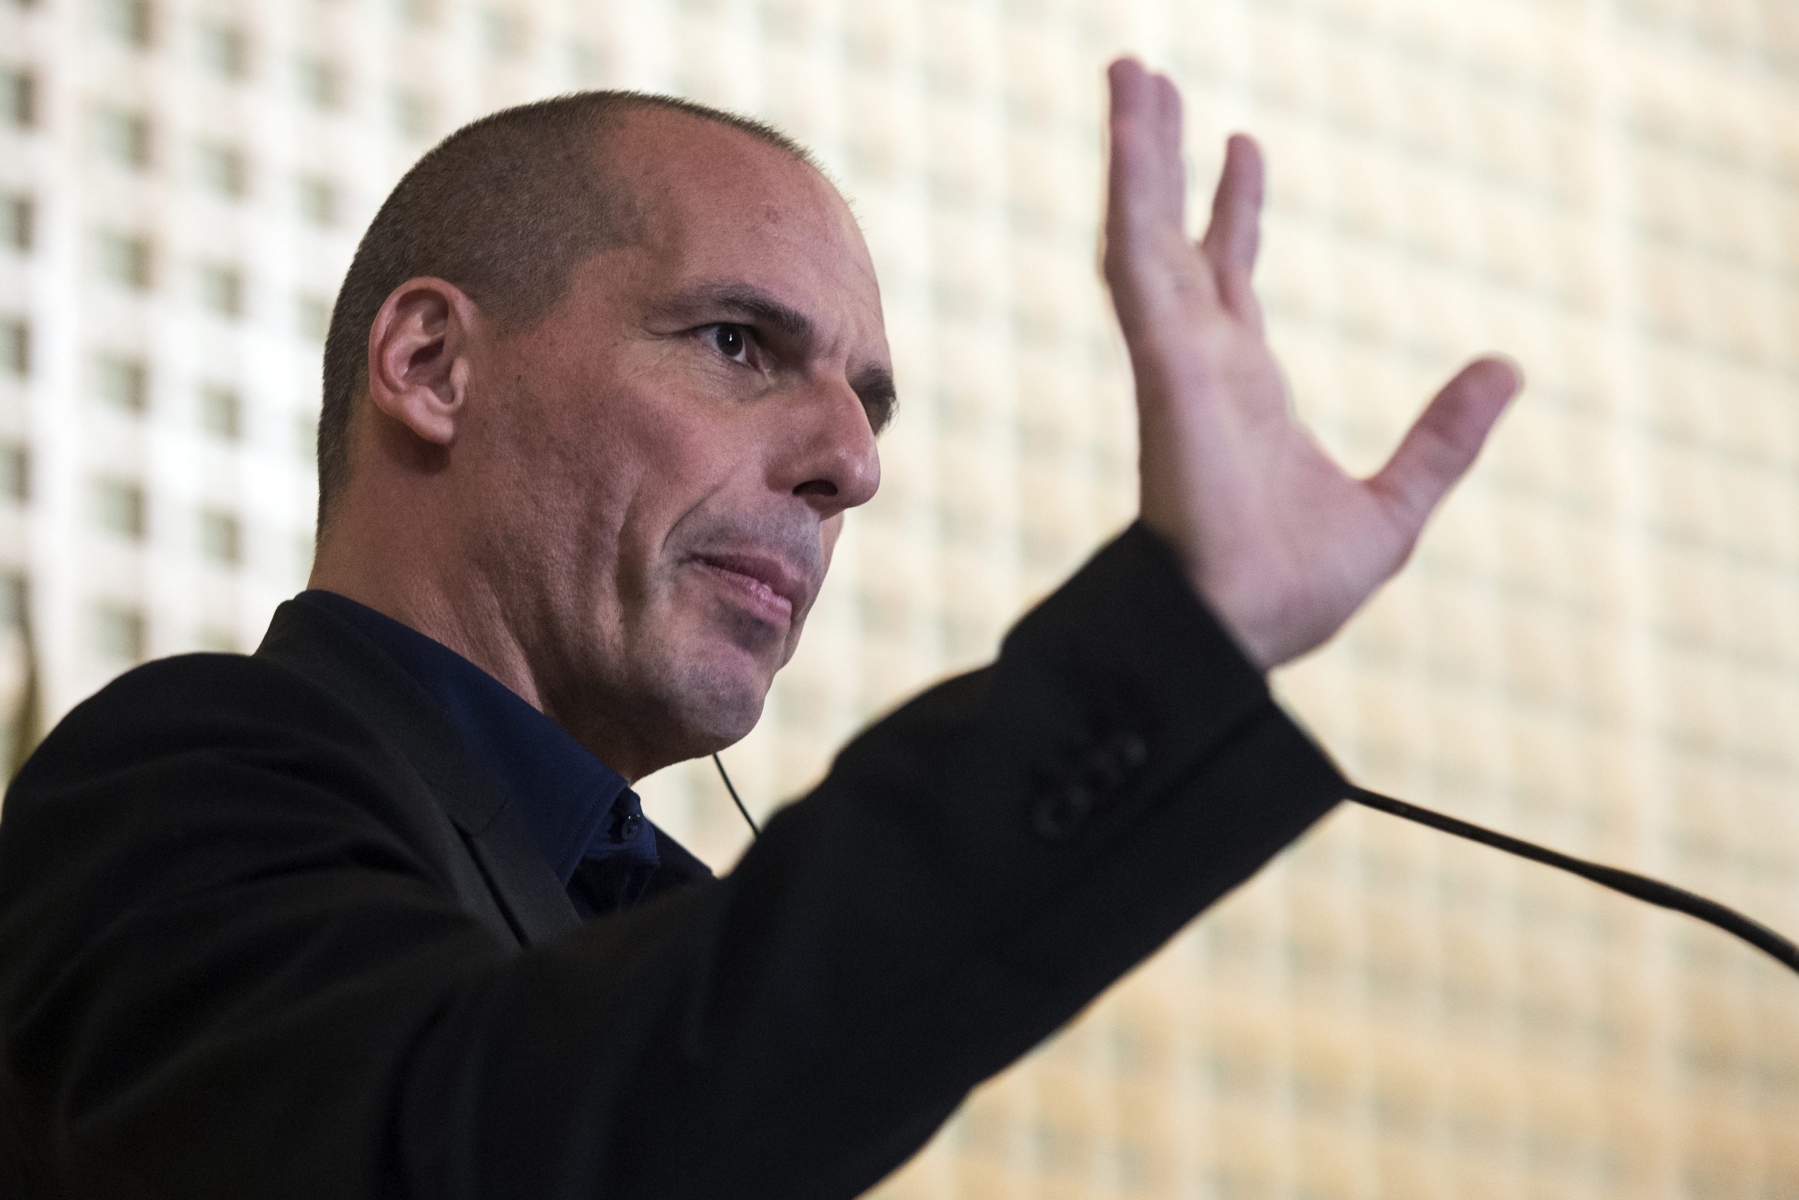 epa04599856 Greek newly appointed Finance Minister Yanis Varoufakis delivers a speech with his French counterpart Michel Sapin (not pictured) during a press conference after a meeting at the French Ministry of Economy and Finance of Becy in Paris, France, 01 February 2015. Greece's finance minister kicked off a European roadshow in Paris as the country's newly elected prime minister showed willingness to negotiate on Greek debt repayment. Appointed on the 27 January 2015 following the victory of the Greek far left party Syriza and its leader Tsipras, Varoufakis got a head start on his own tour as he met with before heading on to London on 01 February and Rome on 02 February.  EPA/ETIENNE LAURENT FRANCE GREECE DIPLOMACY